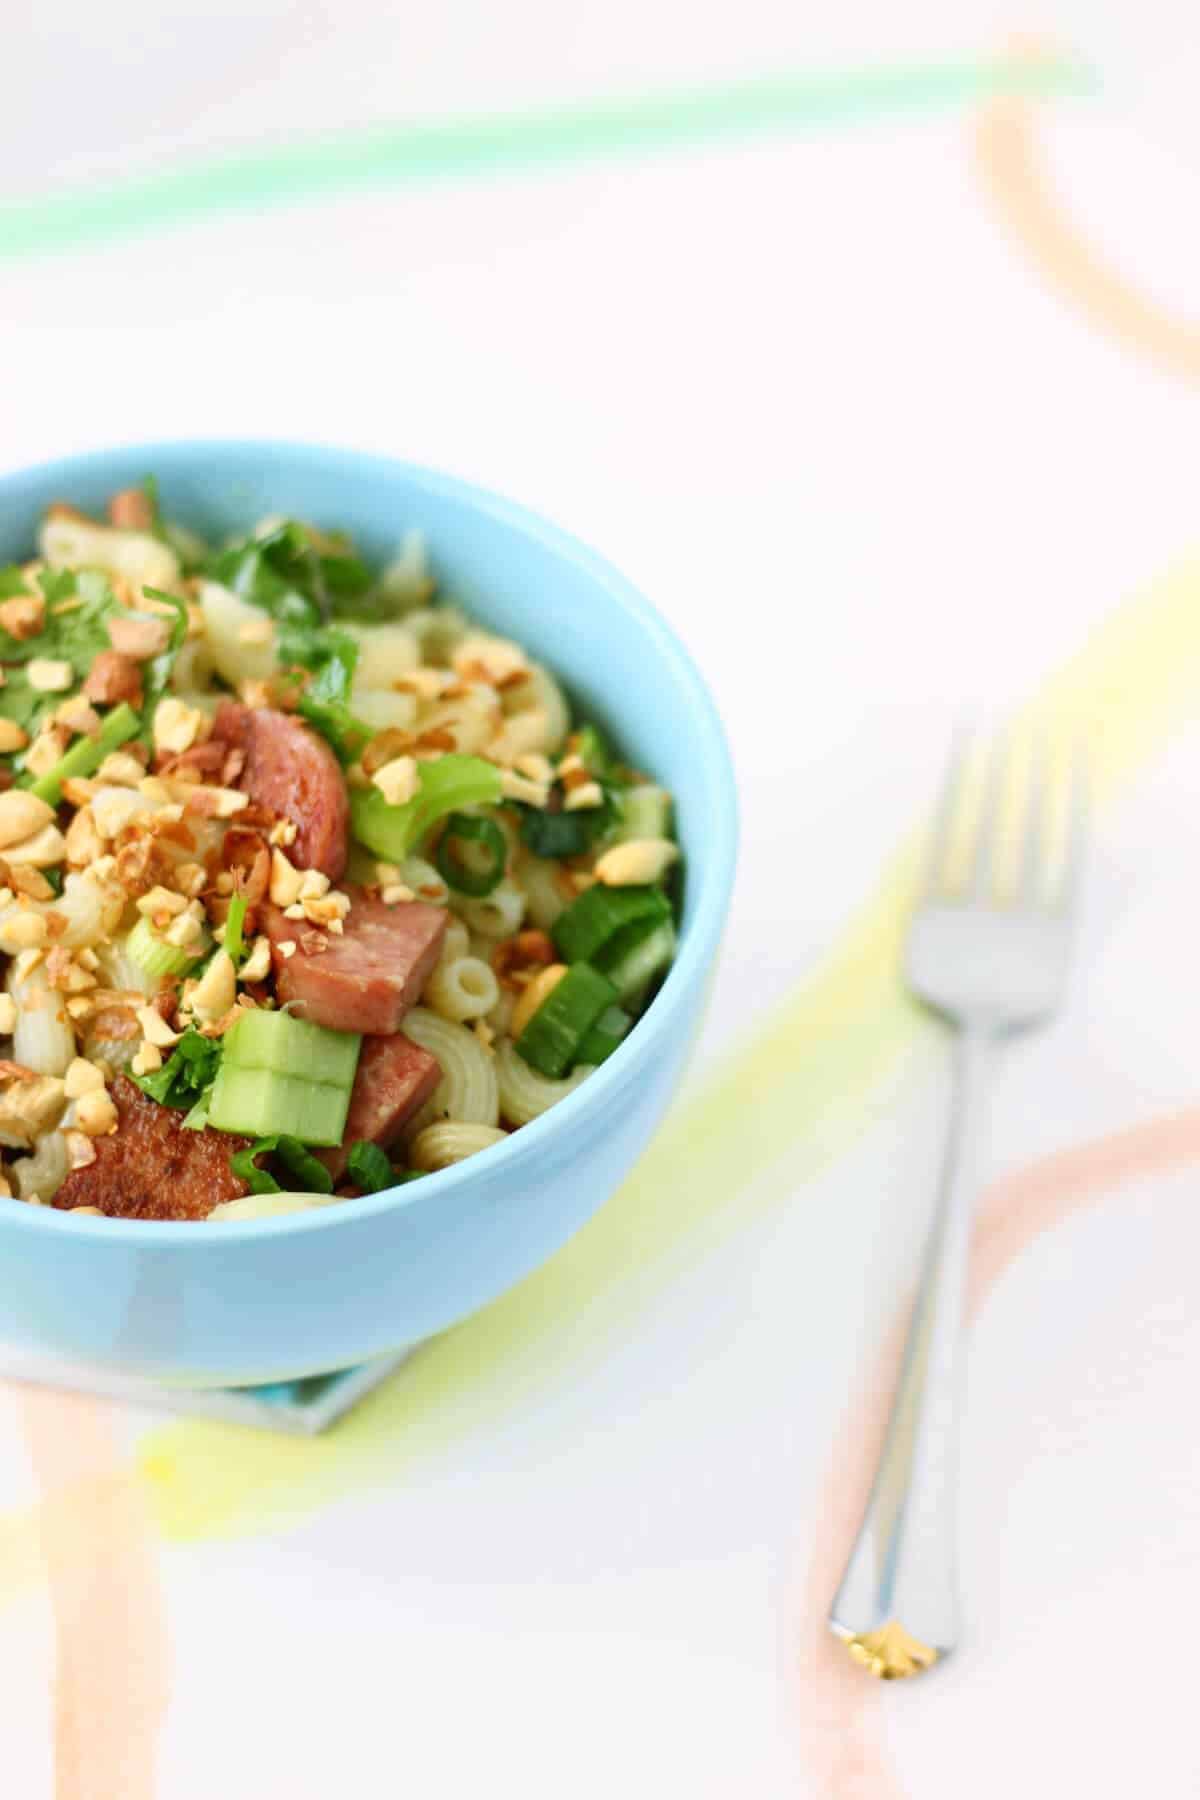 Pasta salad with chopped celery and chunks of spam in a light blue bowl.